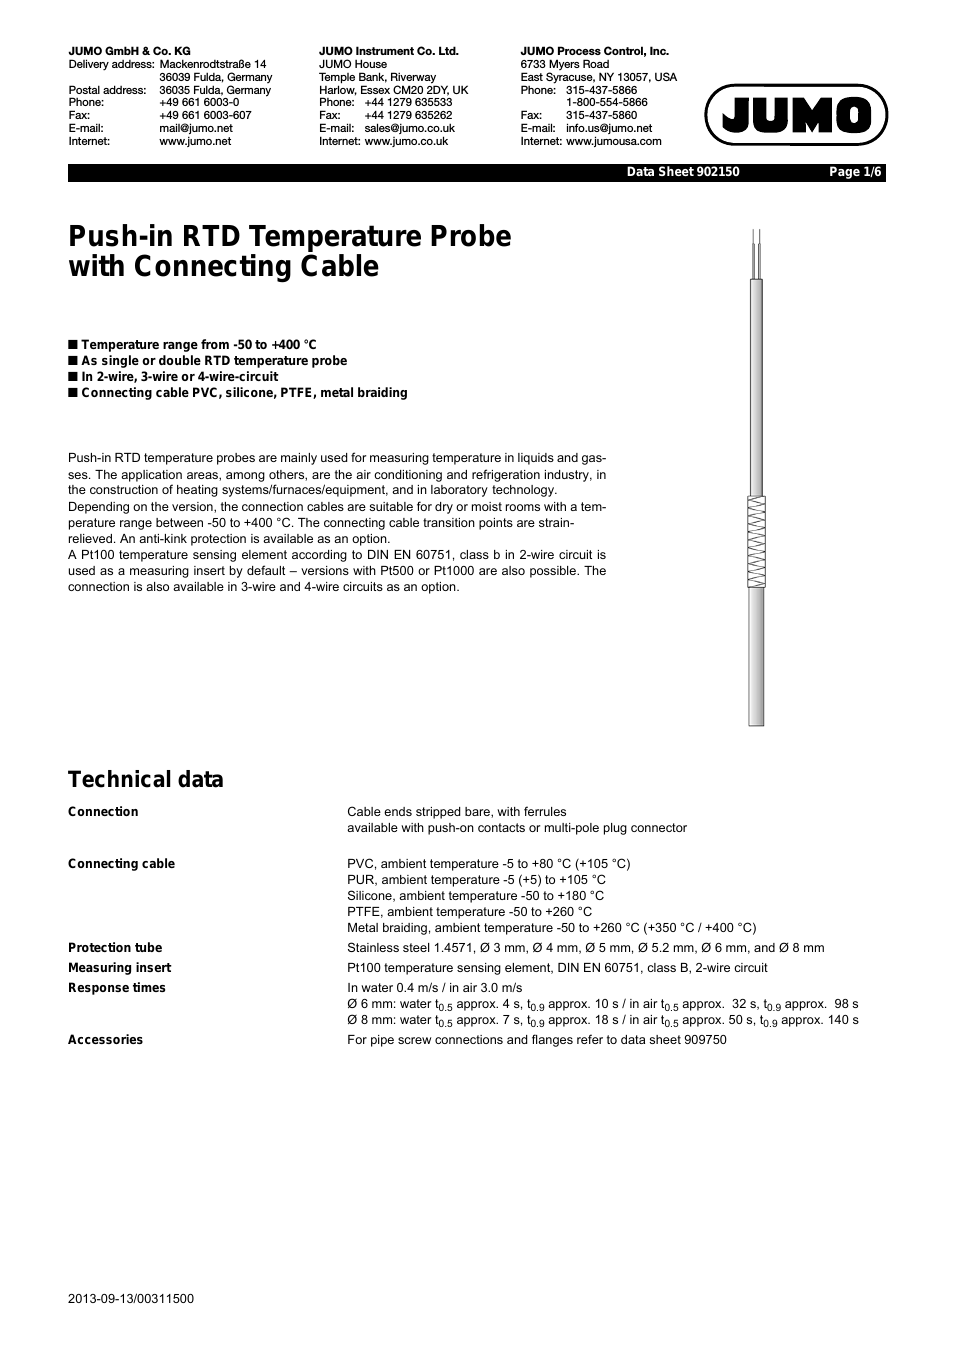 902150 Push-In RTD Temperature Probe with Connecting Cable Data Sheet